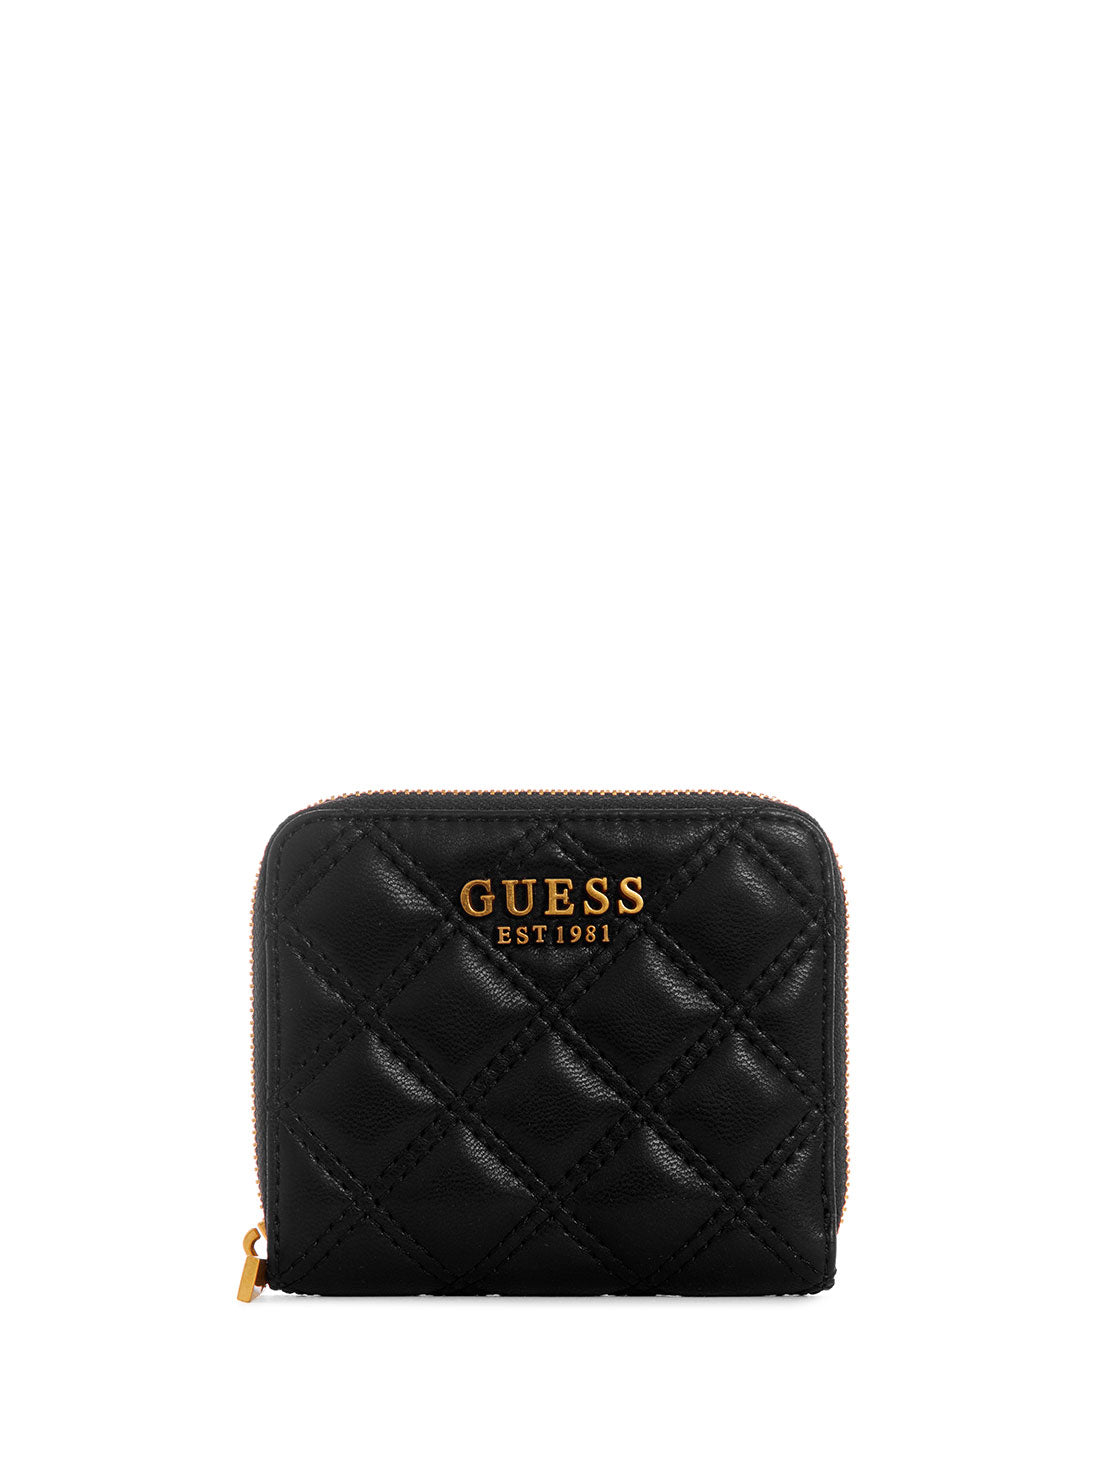 GUESS Black Giully Small Wallet front view